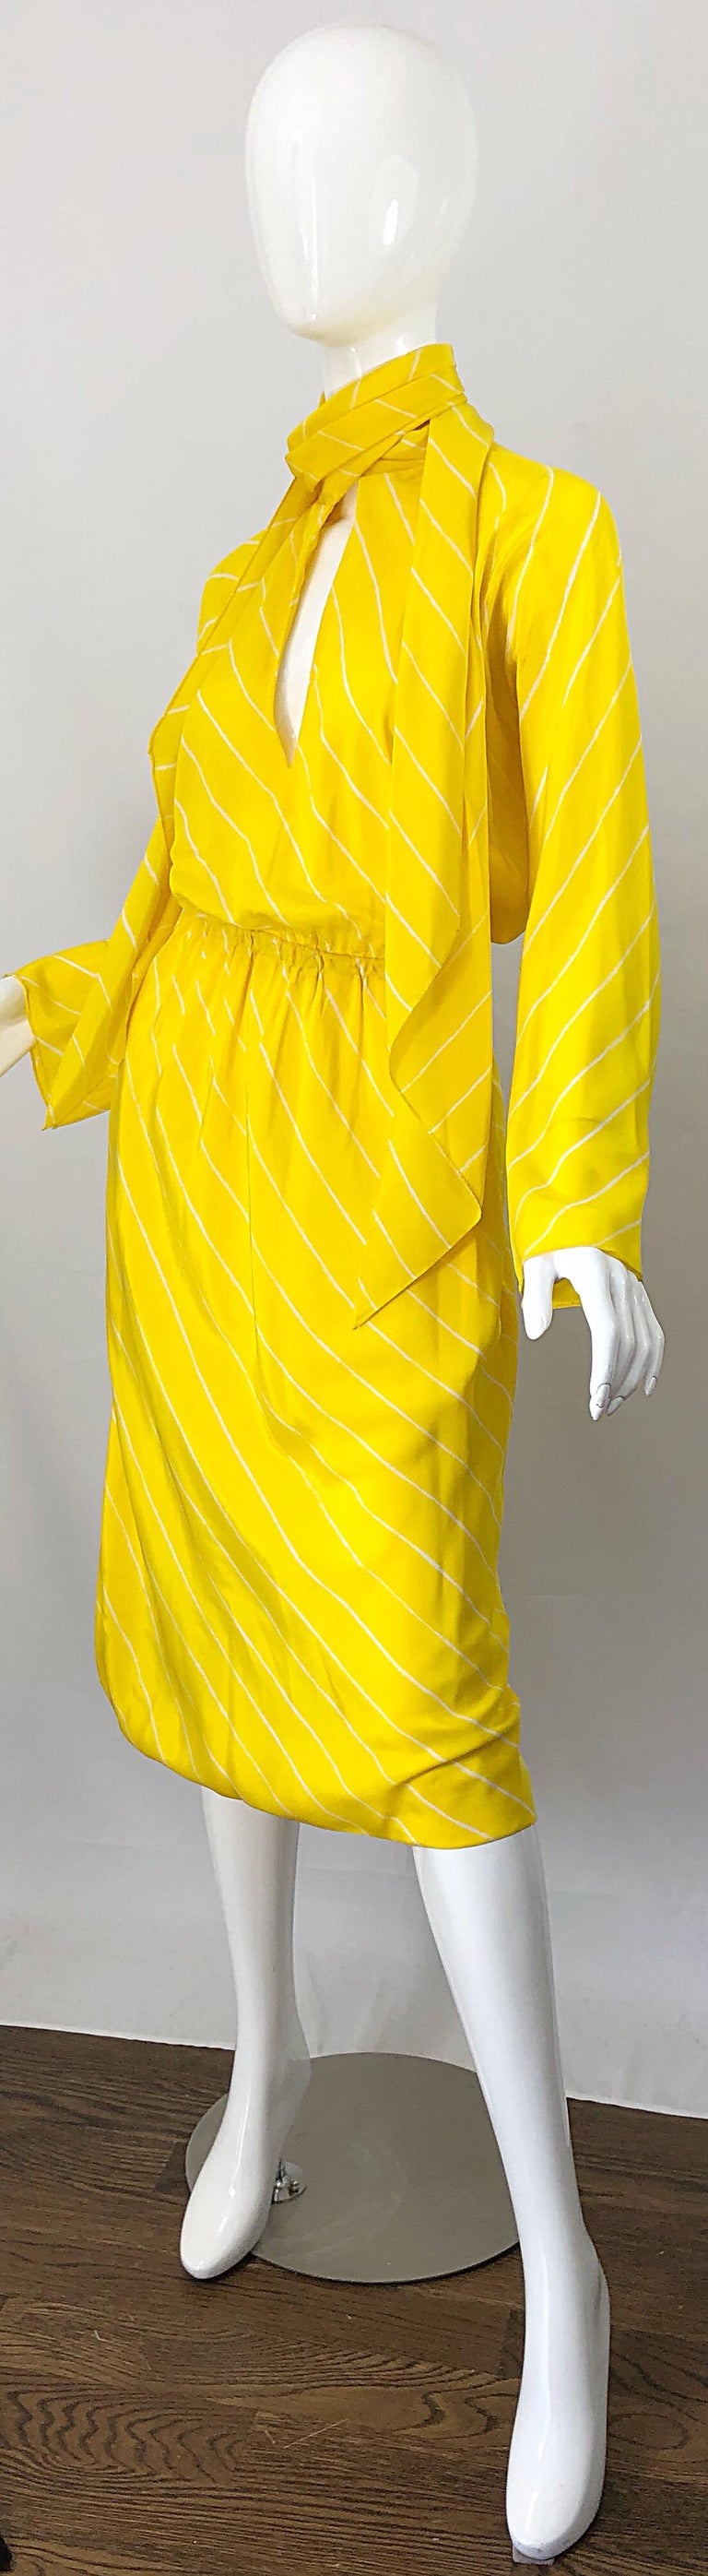 1970s Halston Canary Yellow + White Chevron Striped Bell Sleeve 70s Scarf Dress For Sale 3